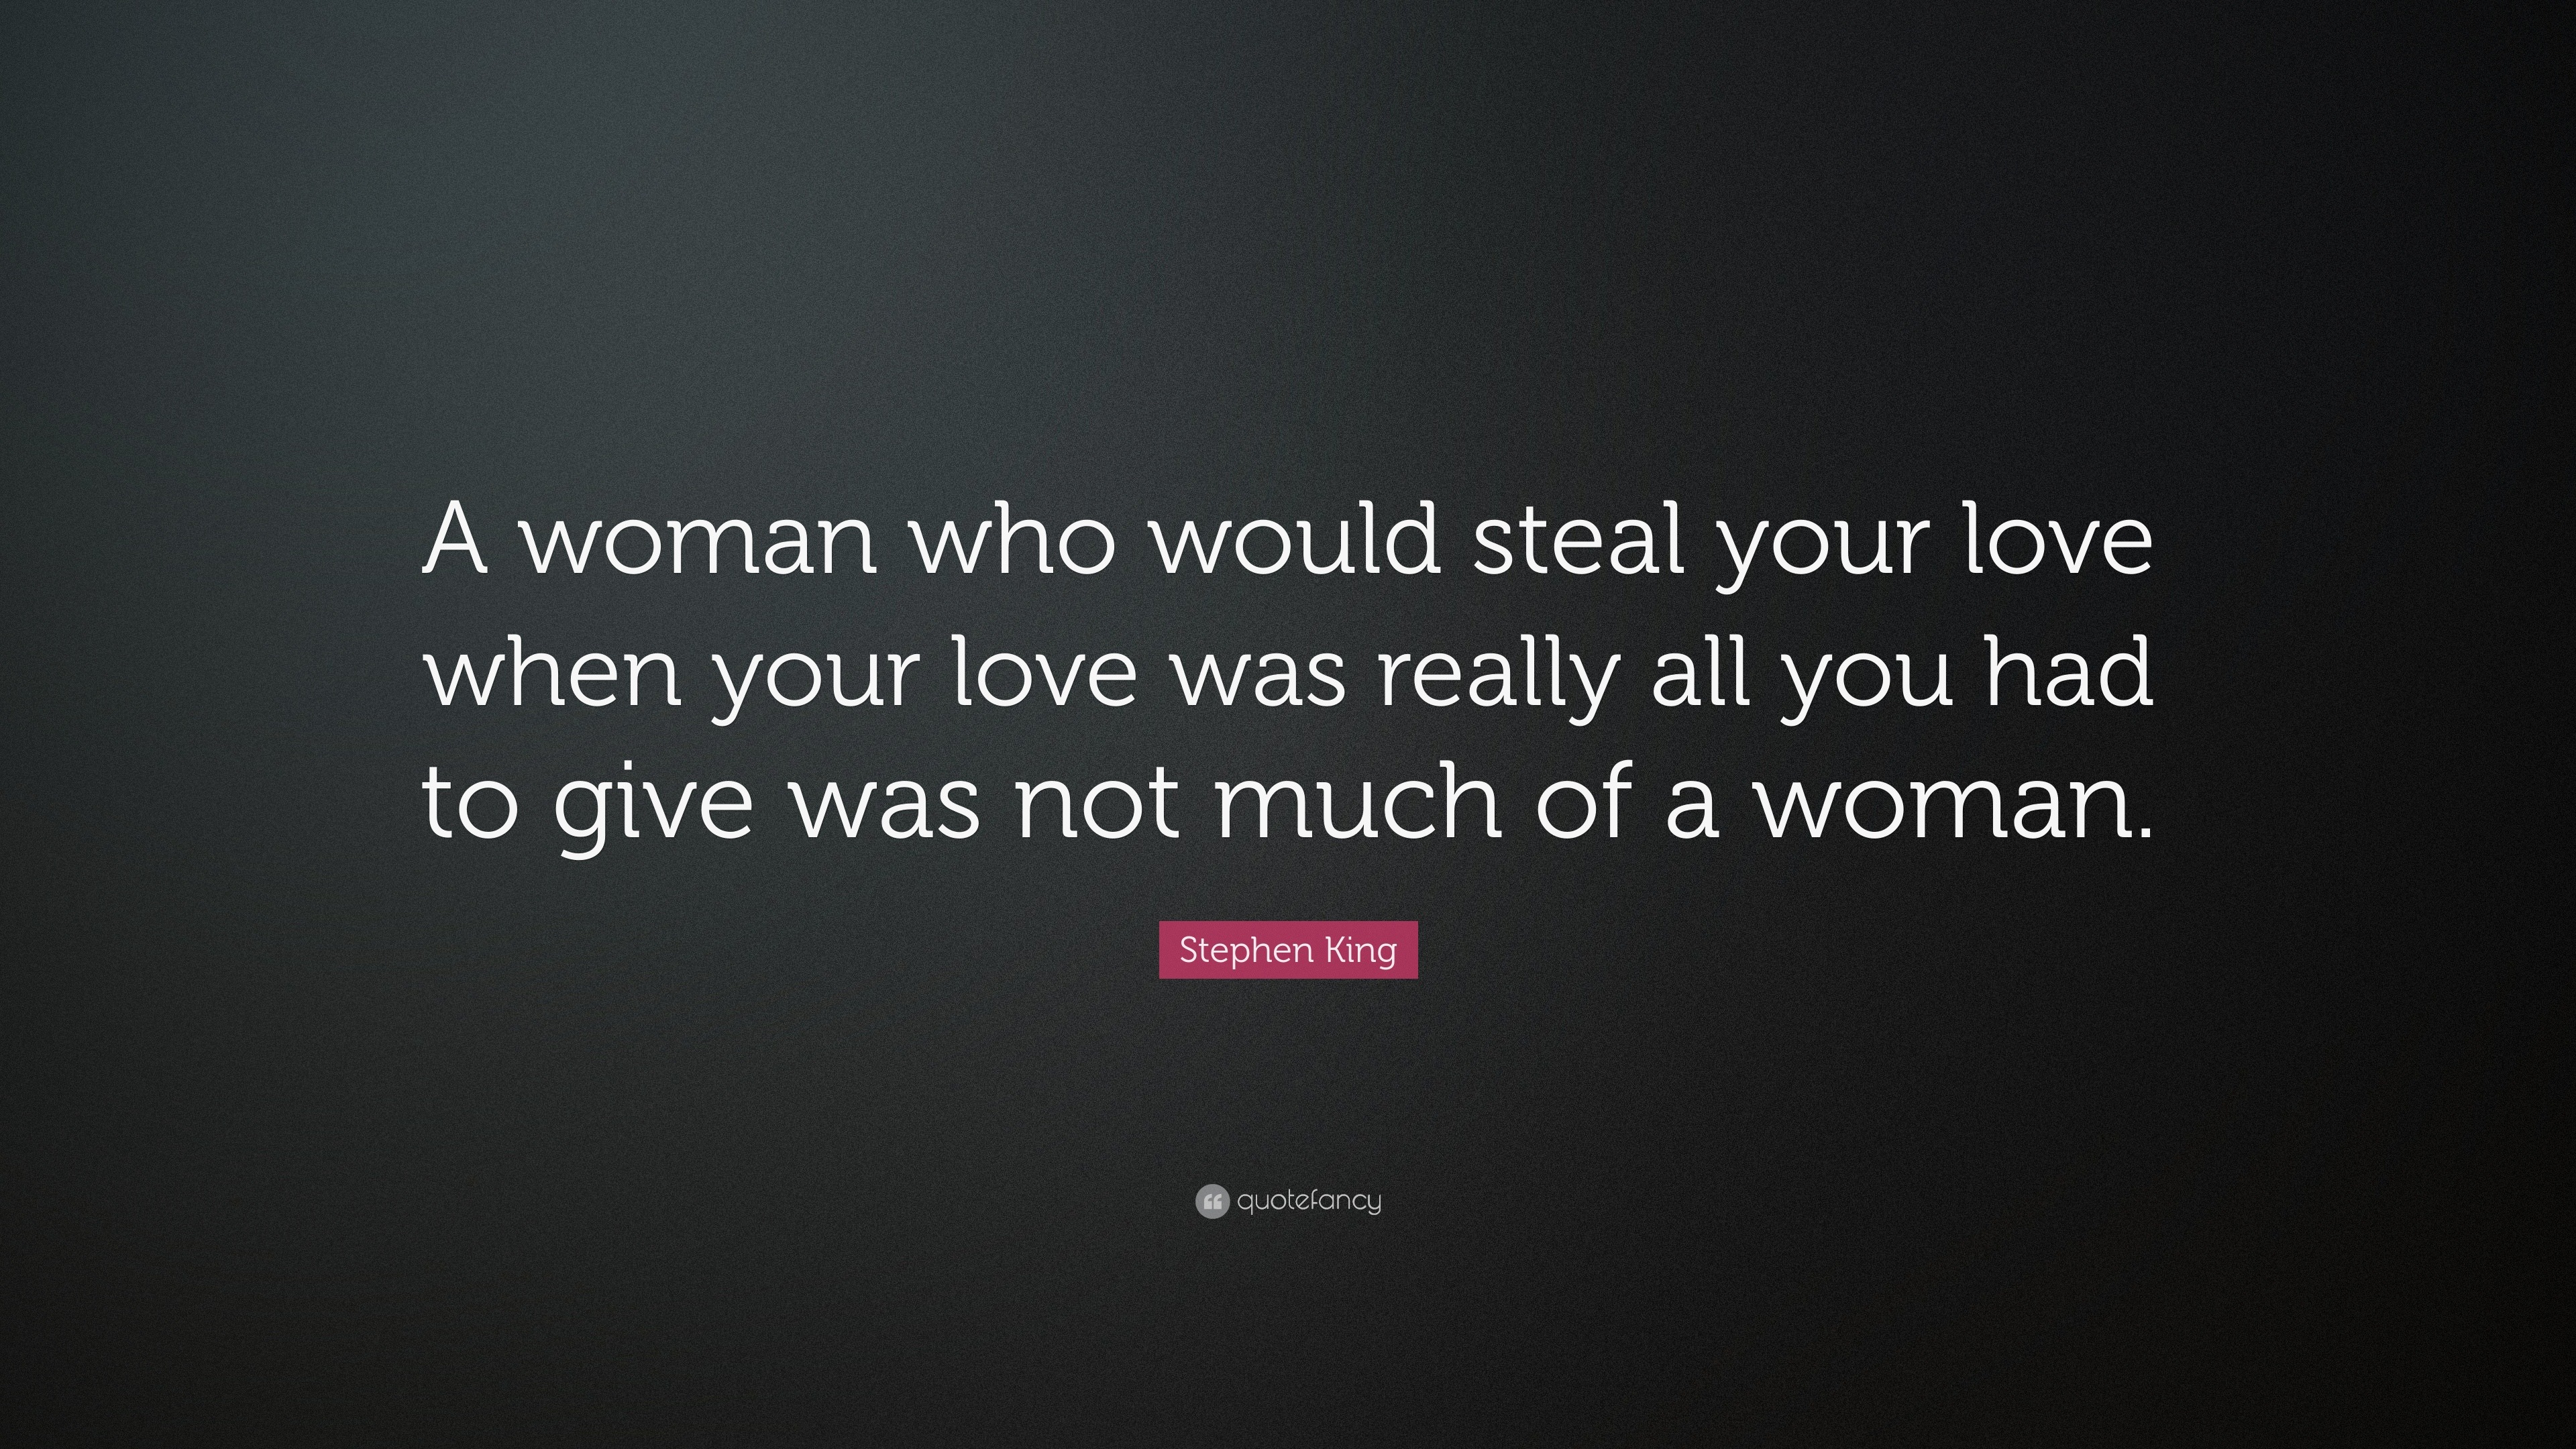 Stephen King Quote: “A woman who would steal your love when your love ...